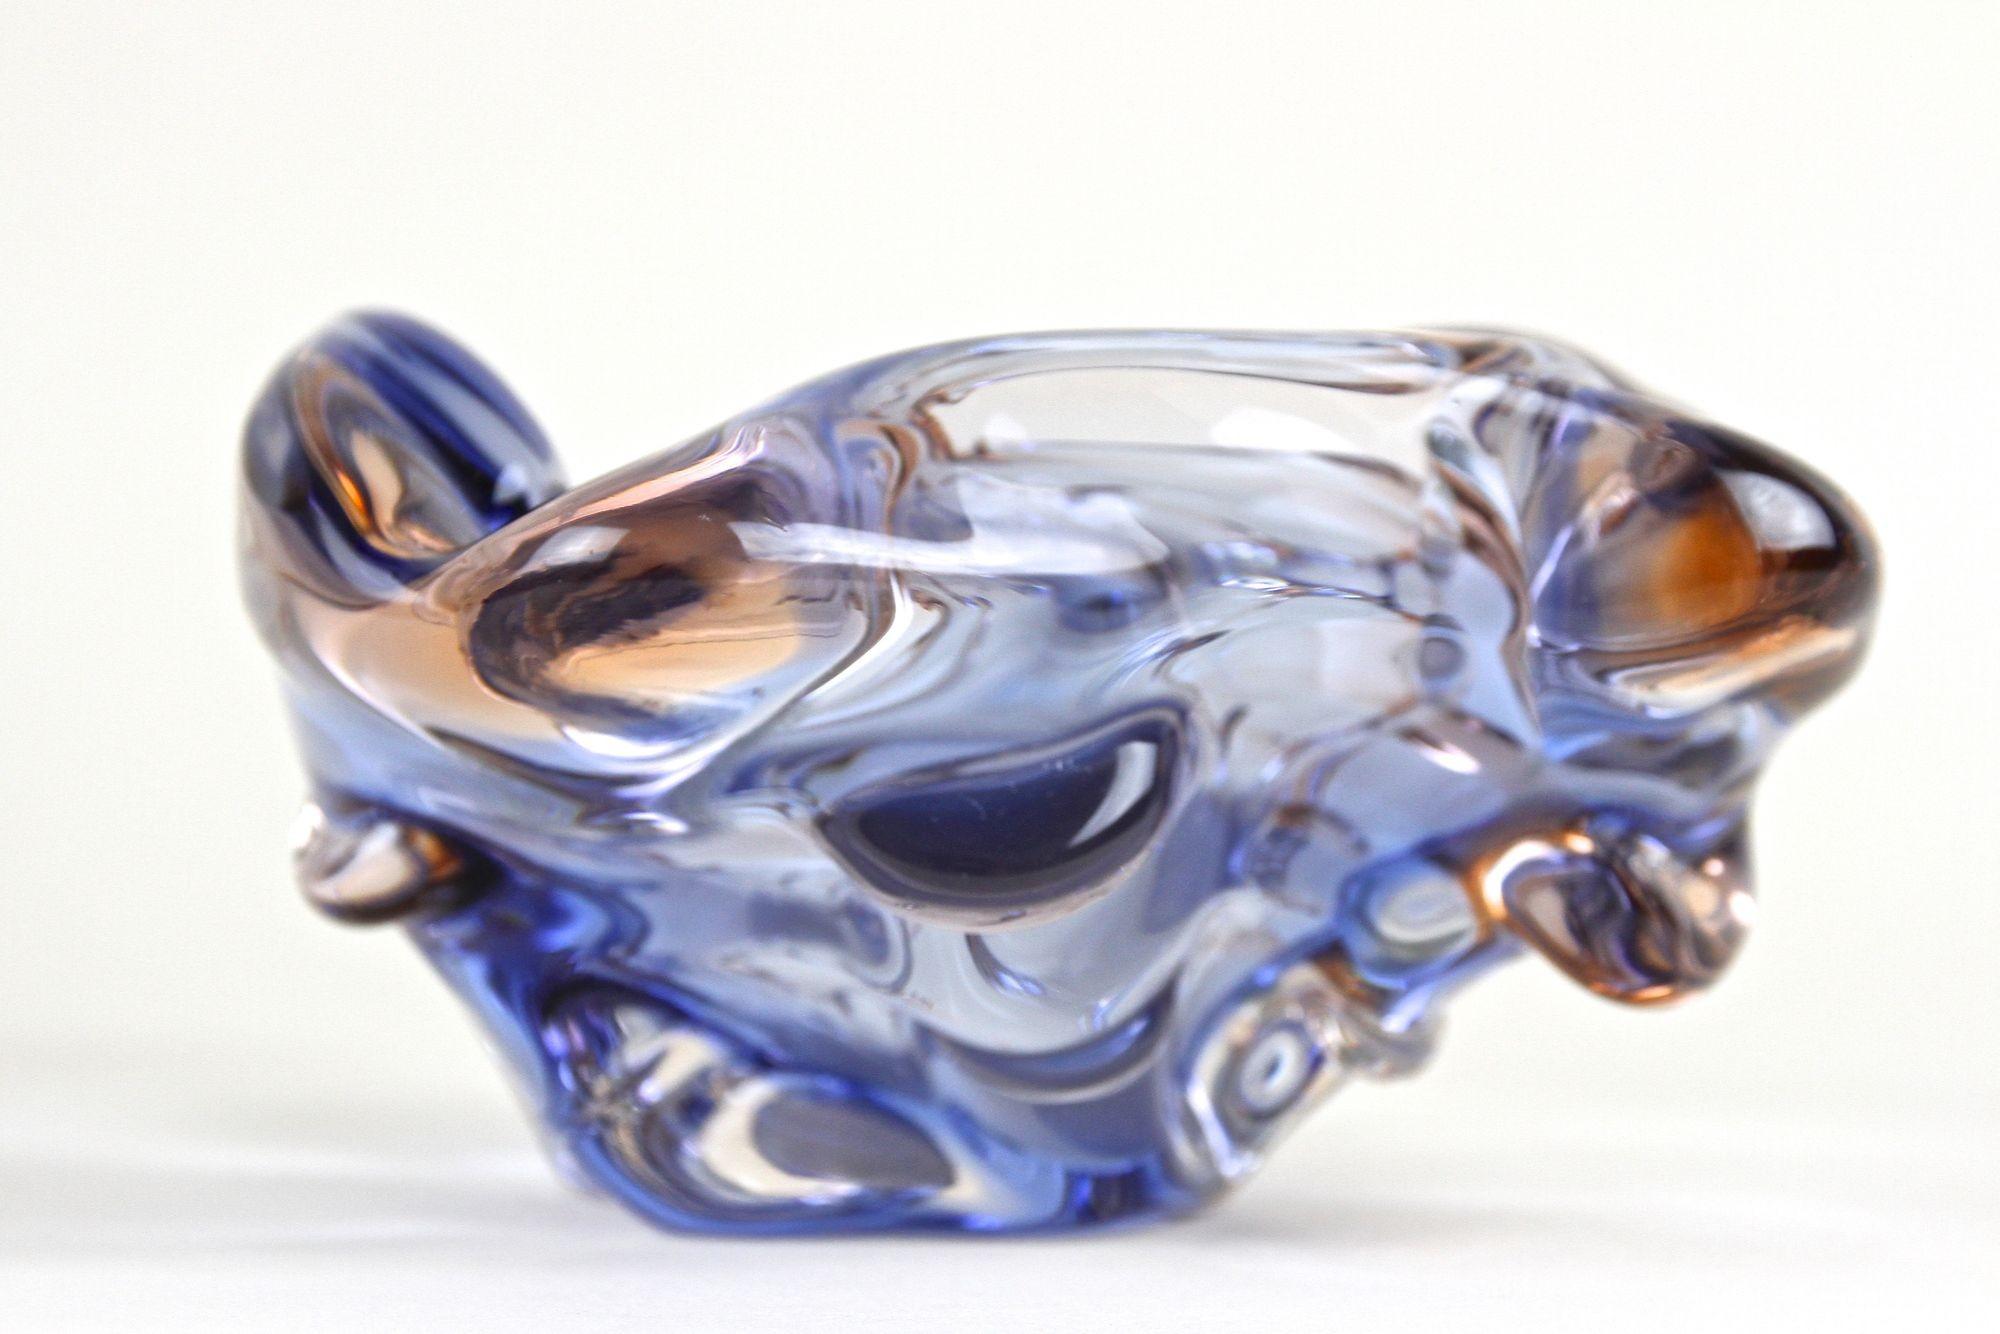 Mid Century Murano Glass Bowl, Blue/ Amber Colored, Italy circa 1960/70 For Sale 7